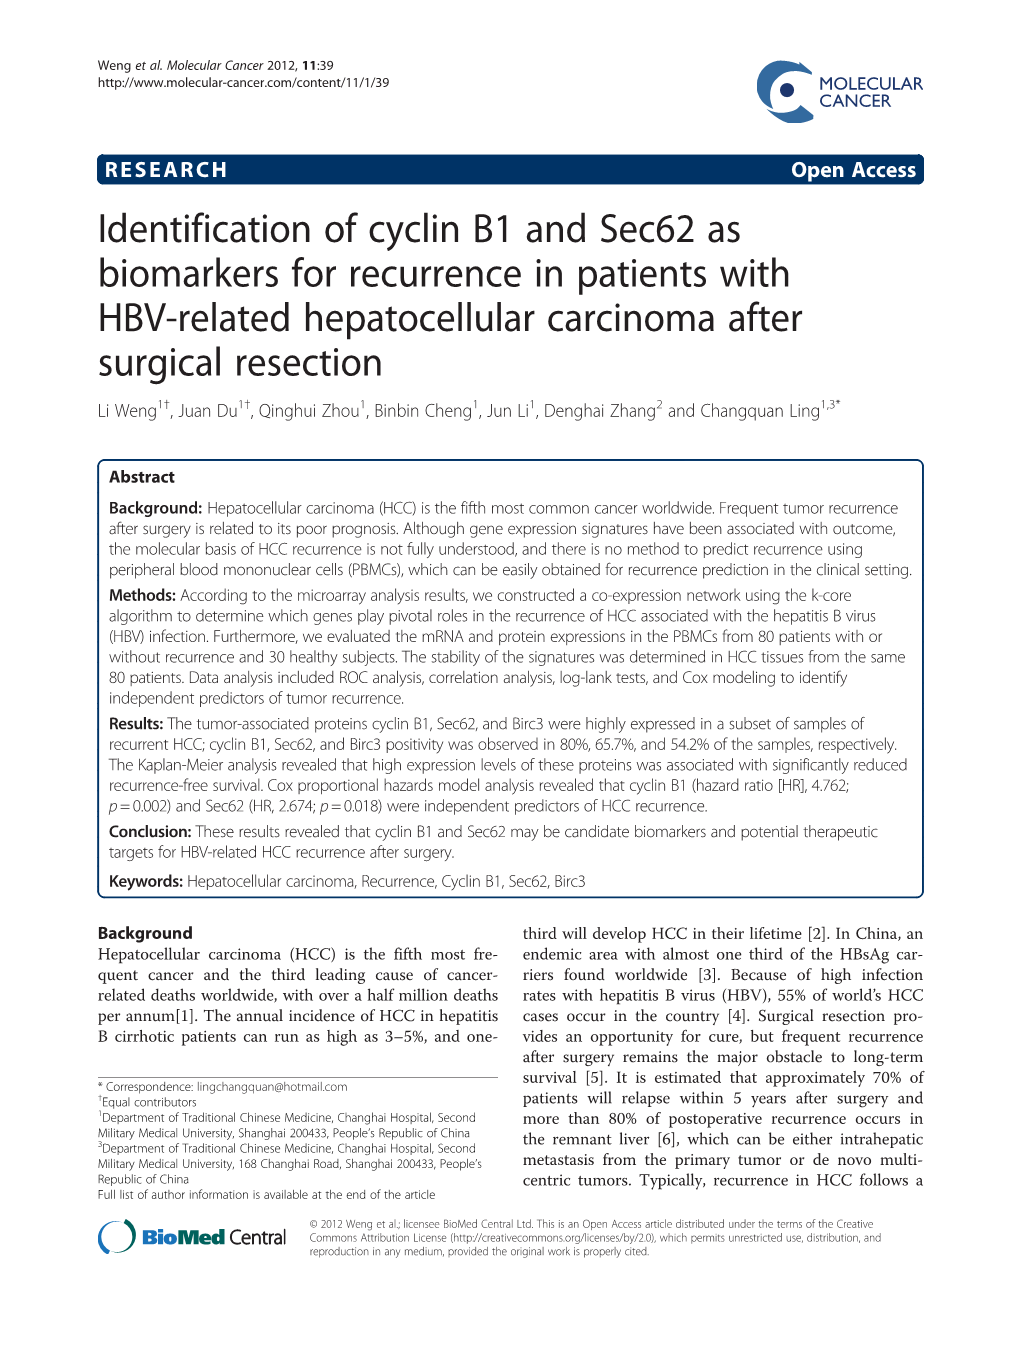 Identification of Cyclin B1 and Sec62 As Biomarkers for Recurrence In